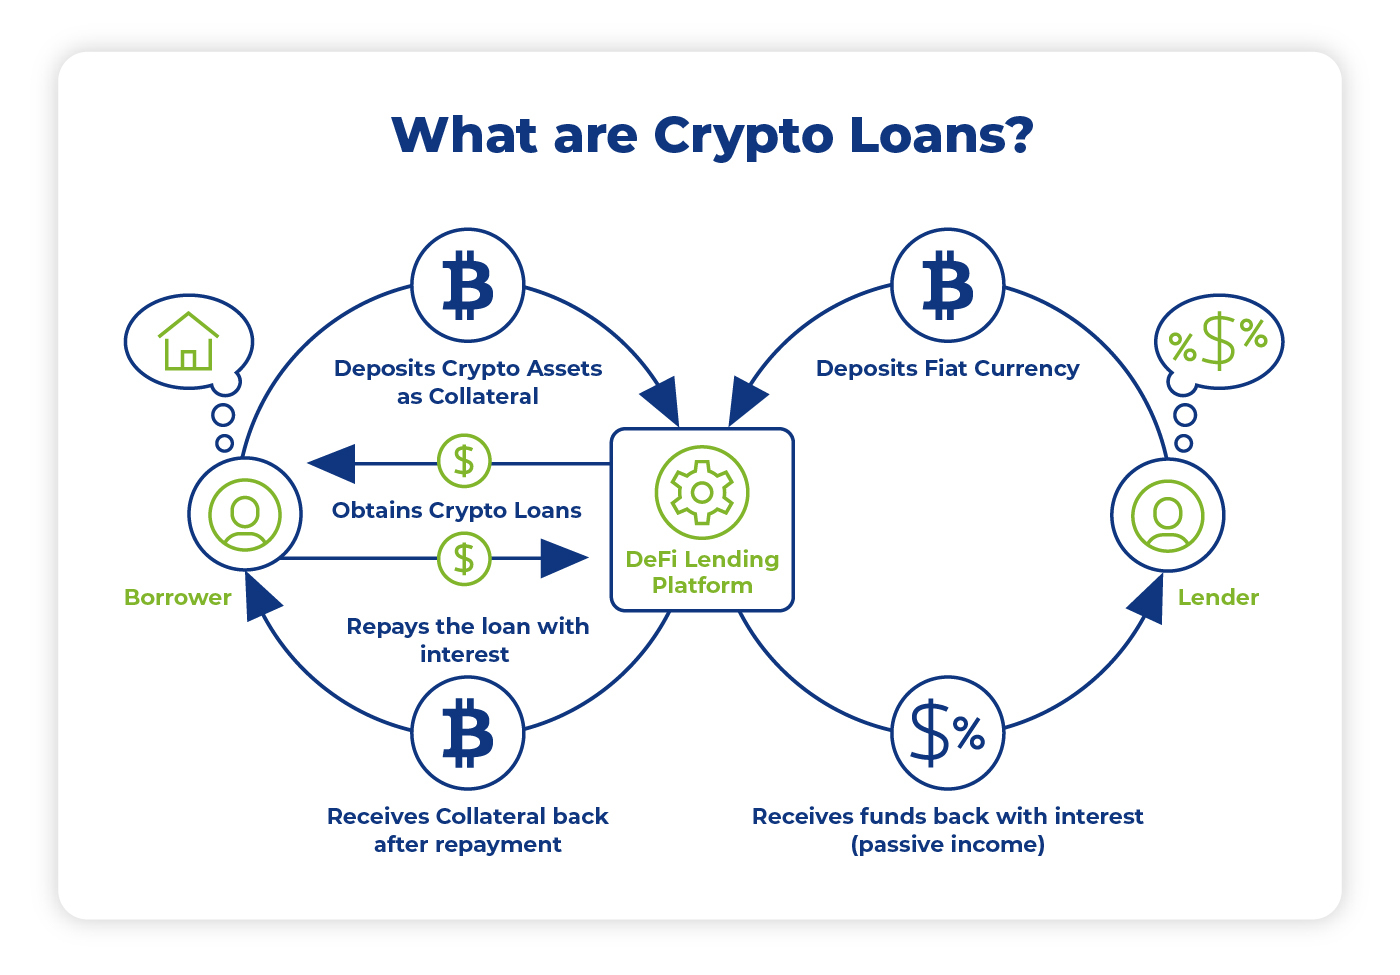 Fastovlt: secured, fully backed crypto loan